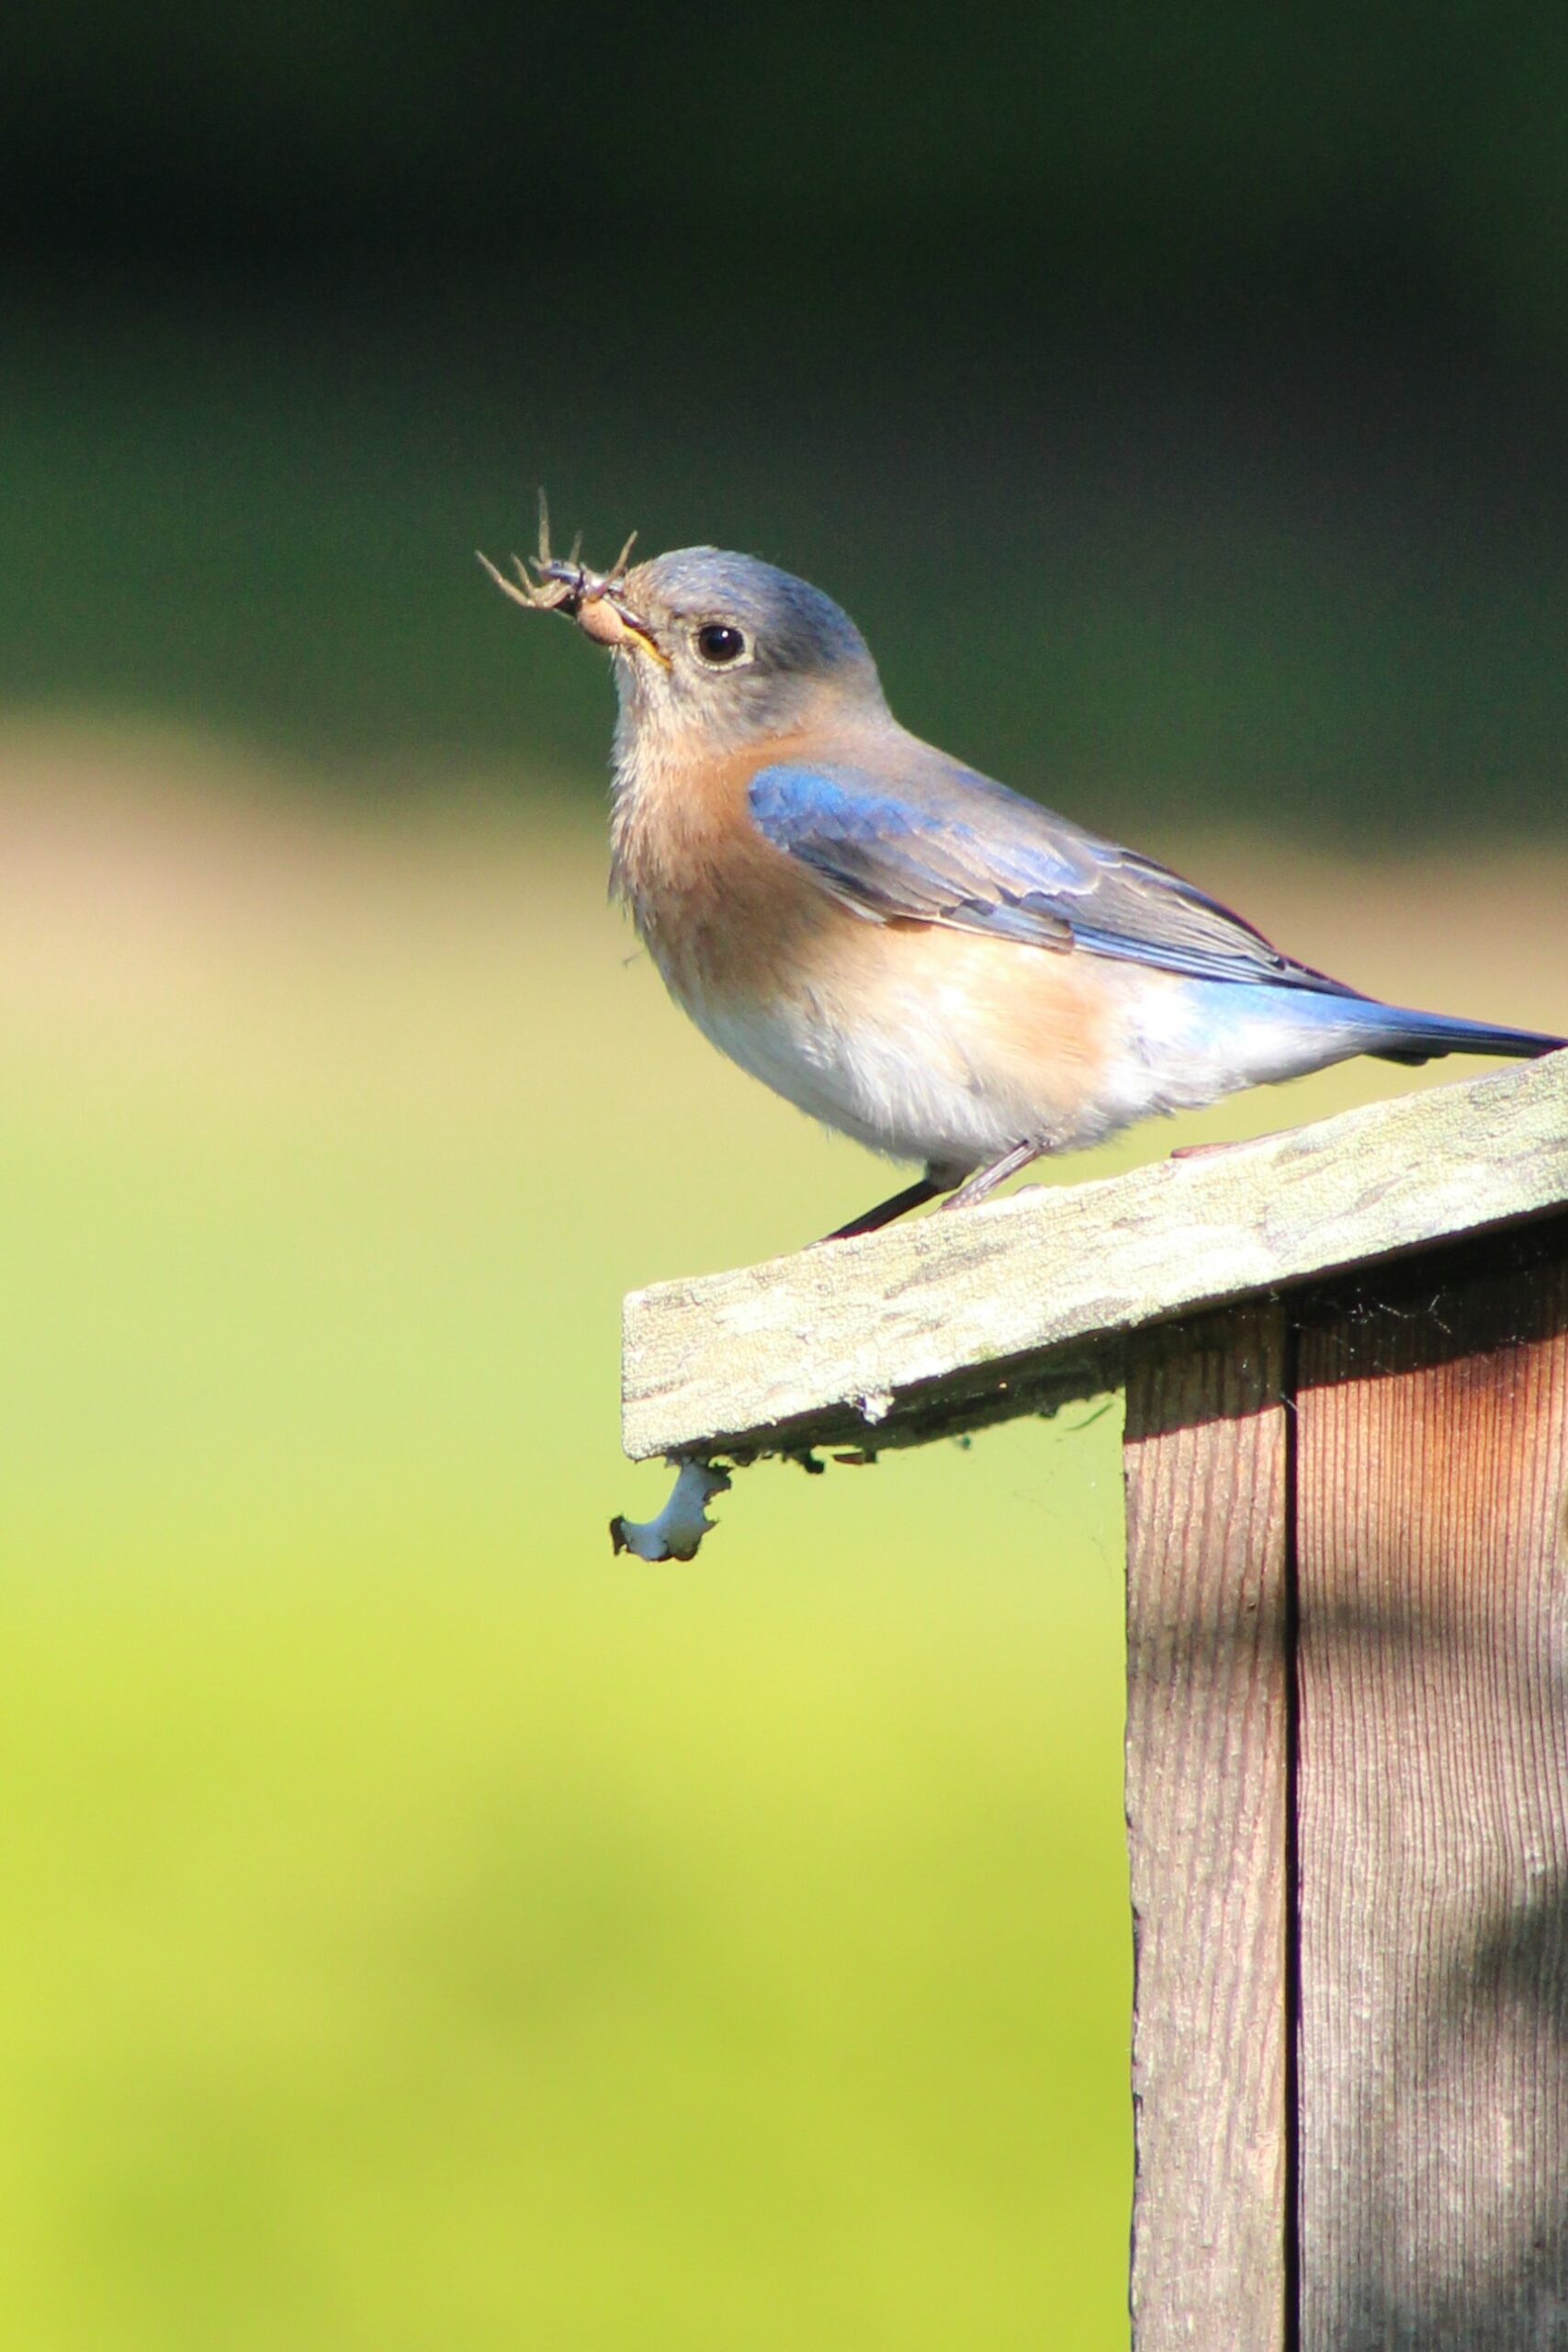 A bluebird sitting on a nesting box with a spider in its mouth.